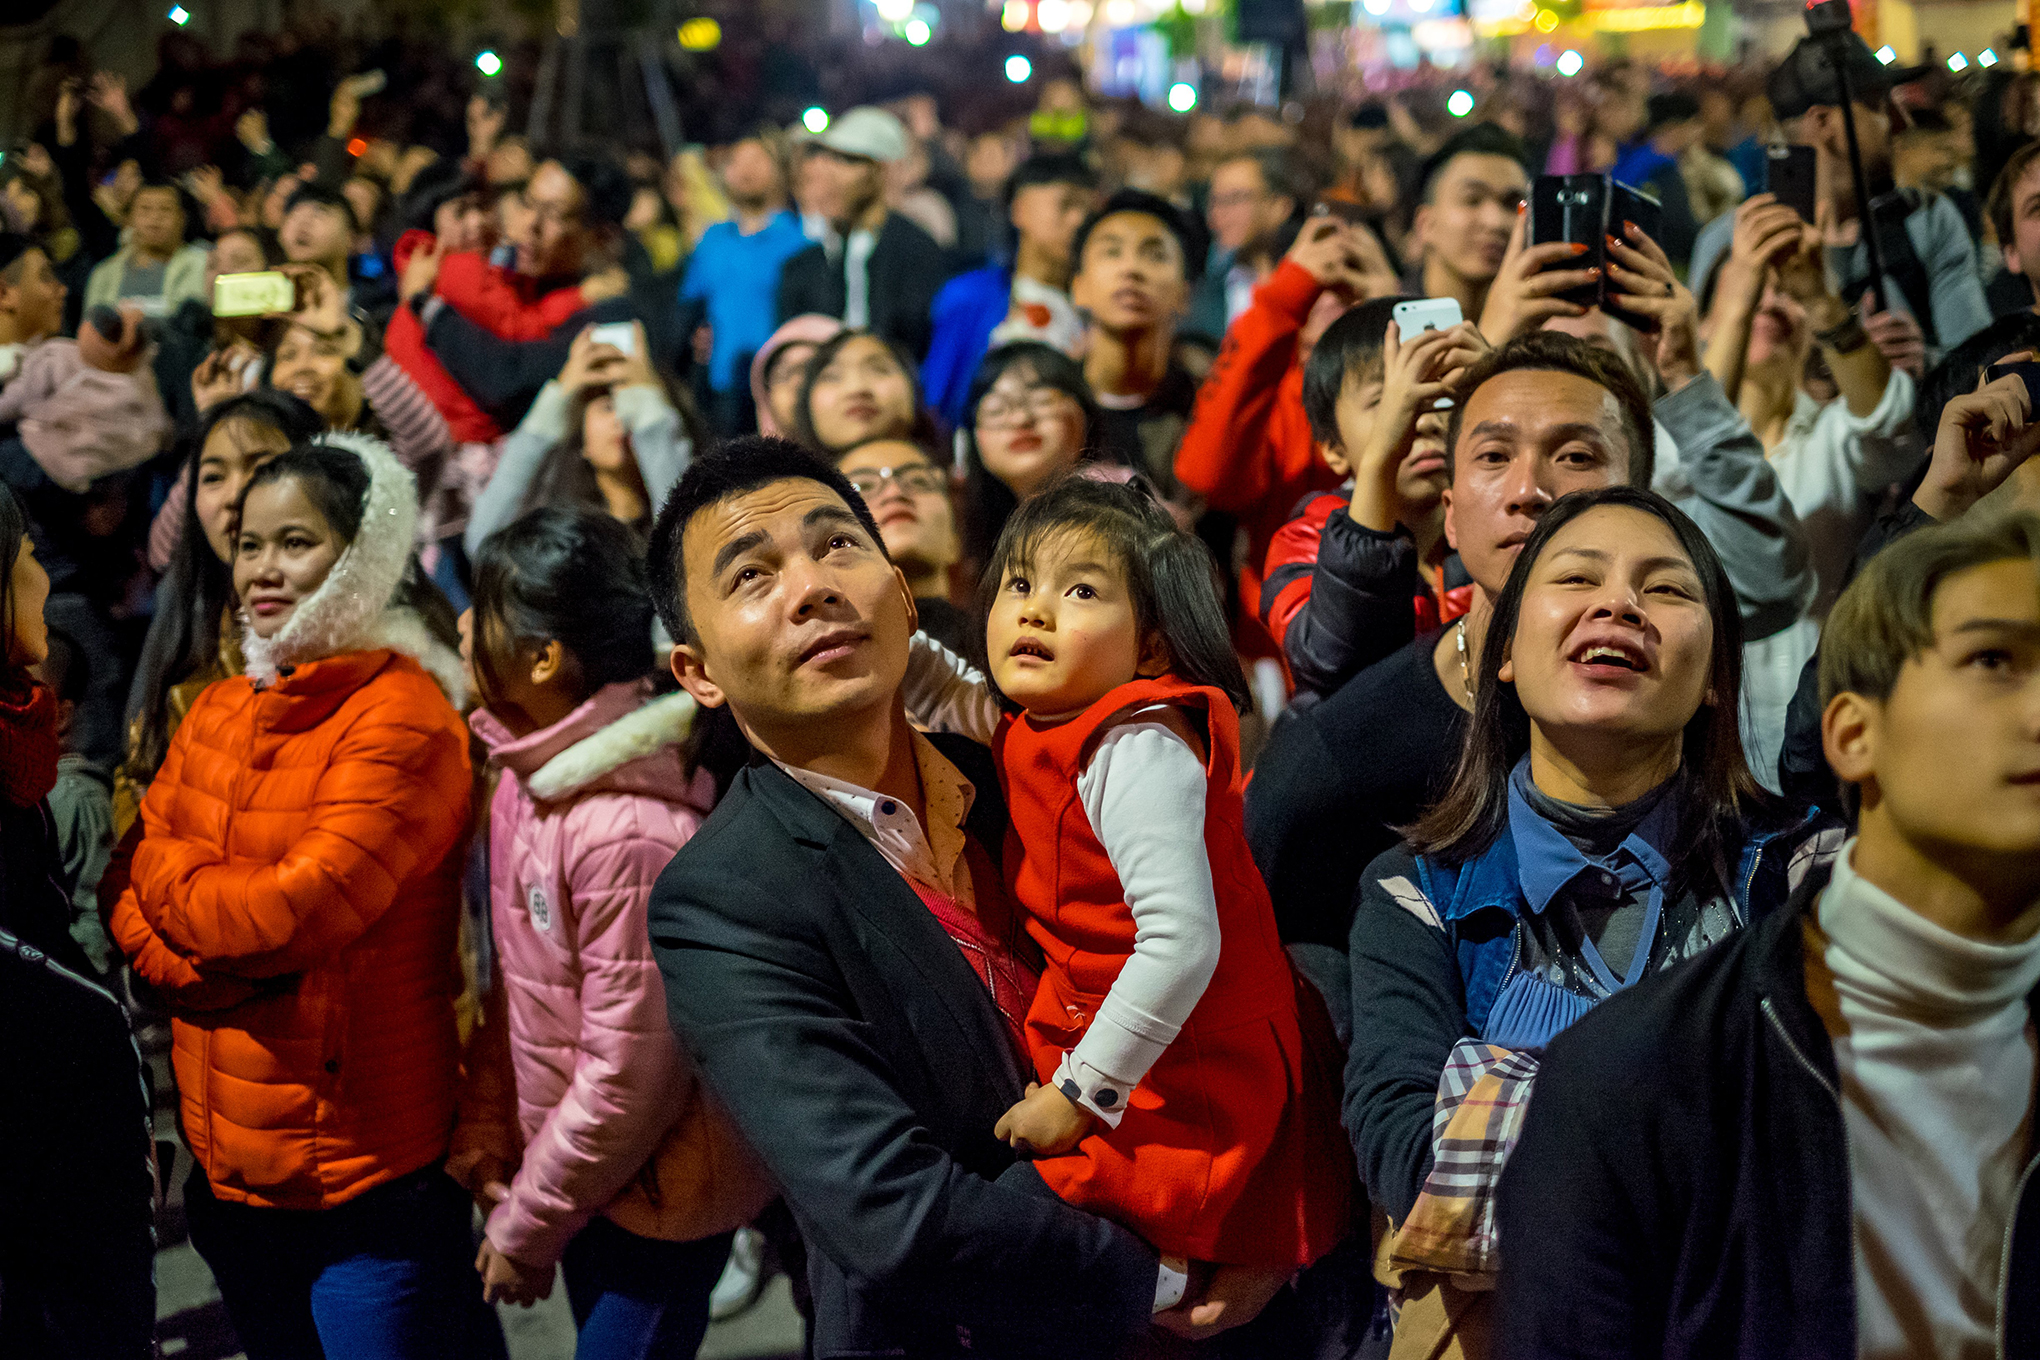 People watch a firework display to mark the Lunar New Year celebrations of the Year of the Dog at the Old Quarter on Feb. 16, 2018 in Hanoi, Vietnam.